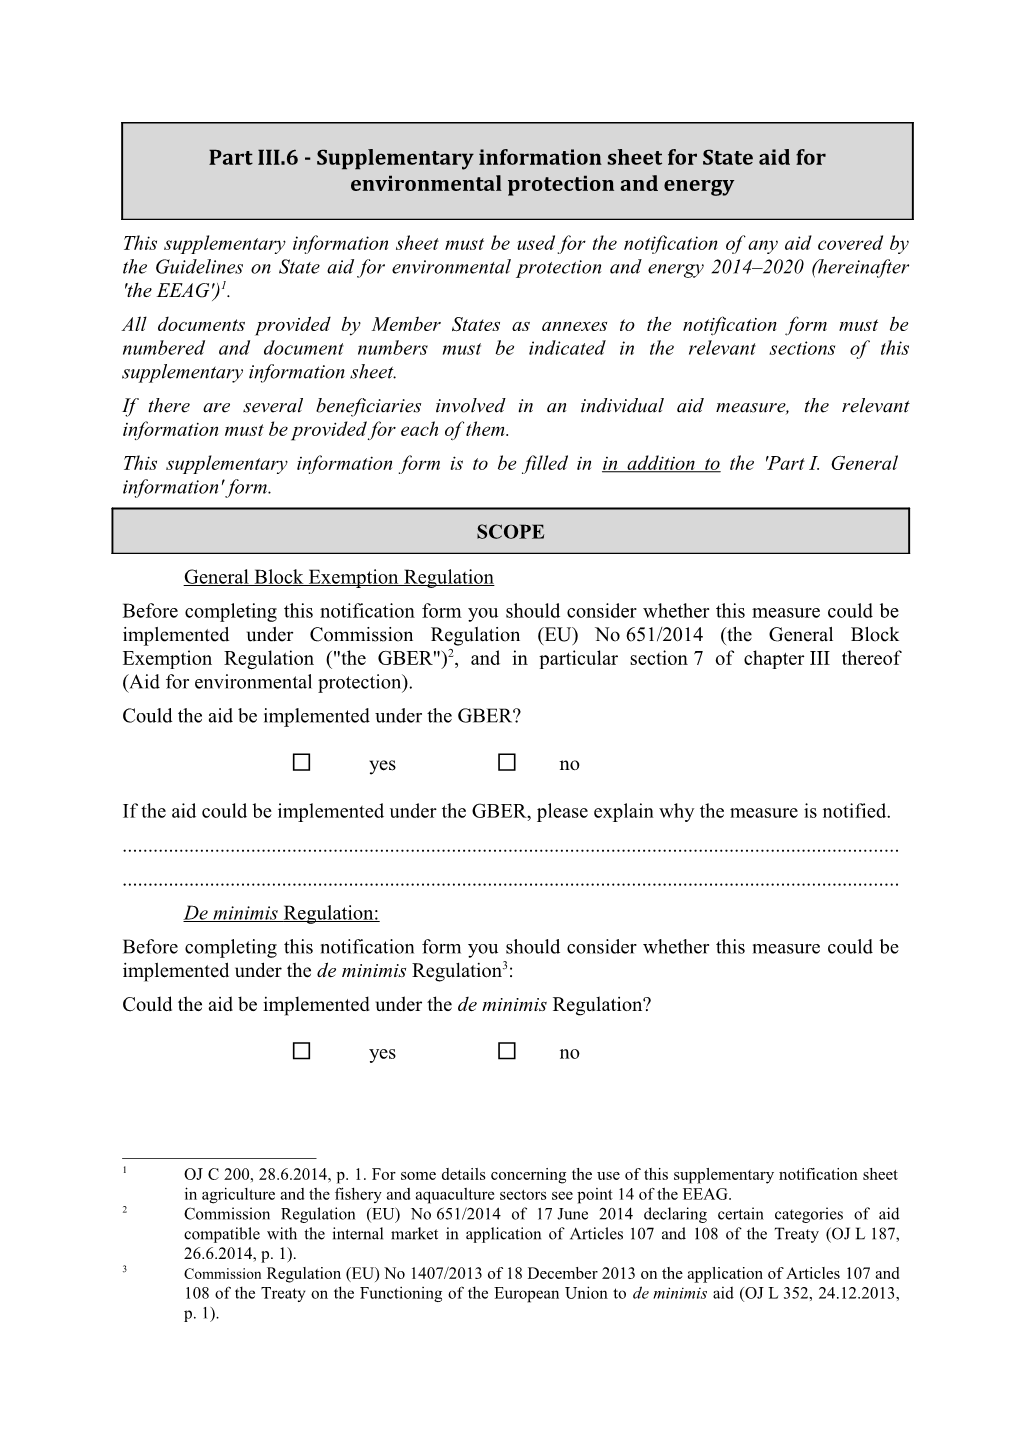 Part III.6 - Supplementary Information Sheet for State Aid for Environmental Protection